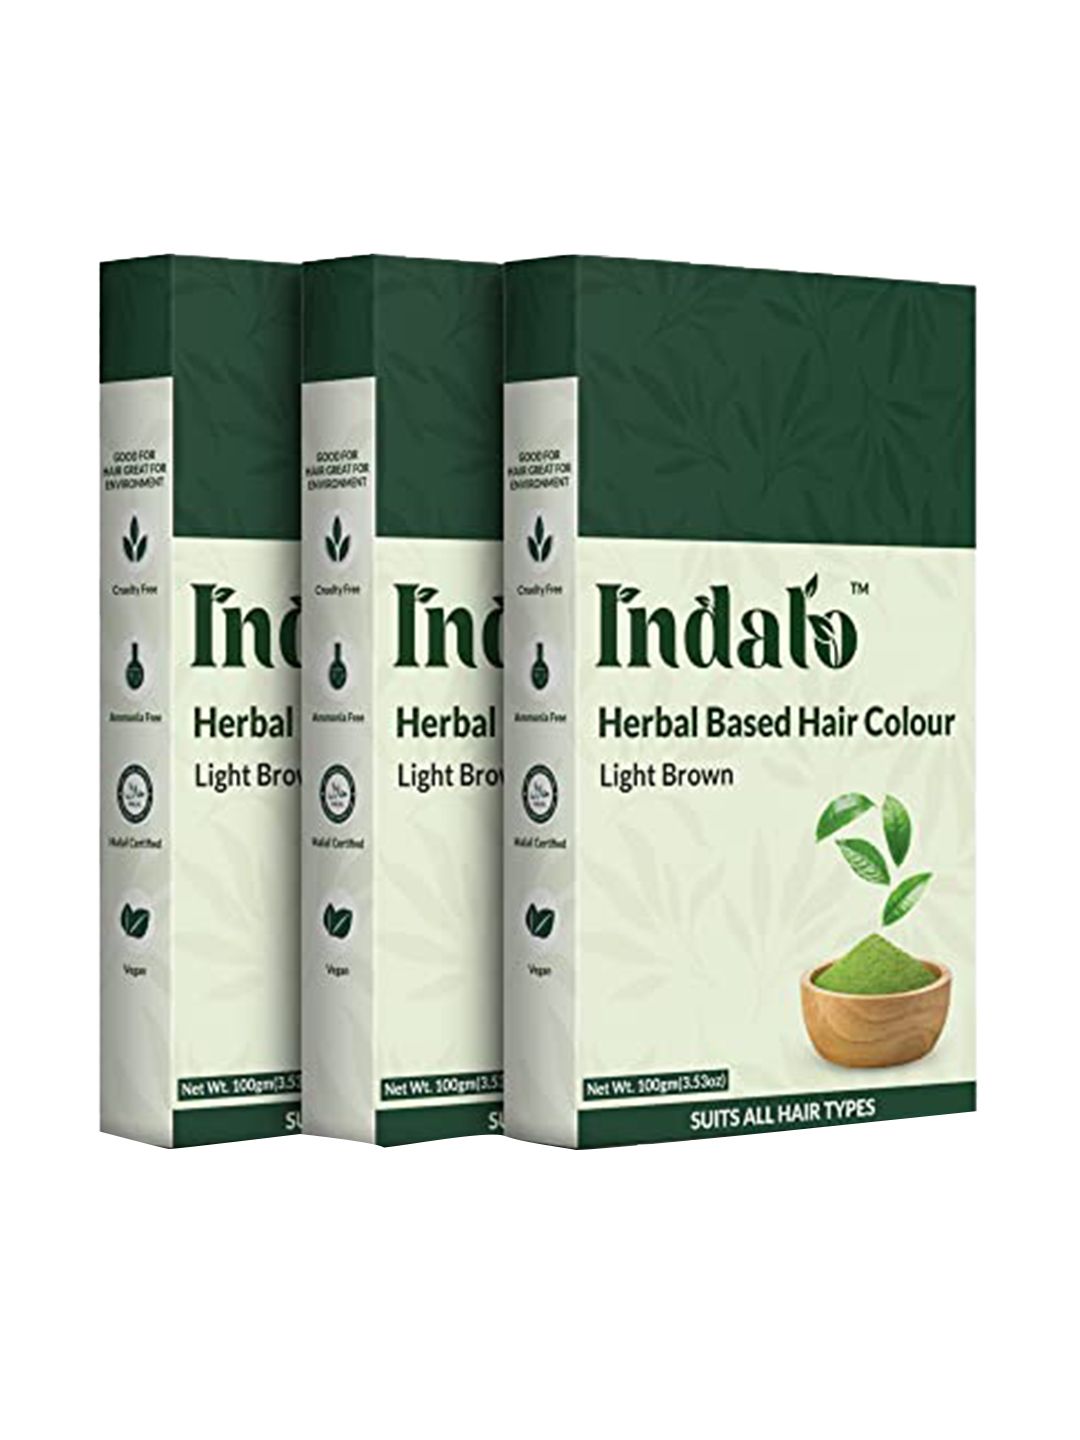 INDALO Set Of 3 Herbal Based Hair Colour with Amla & Brahmi 100g Each - Light Brown Price in India